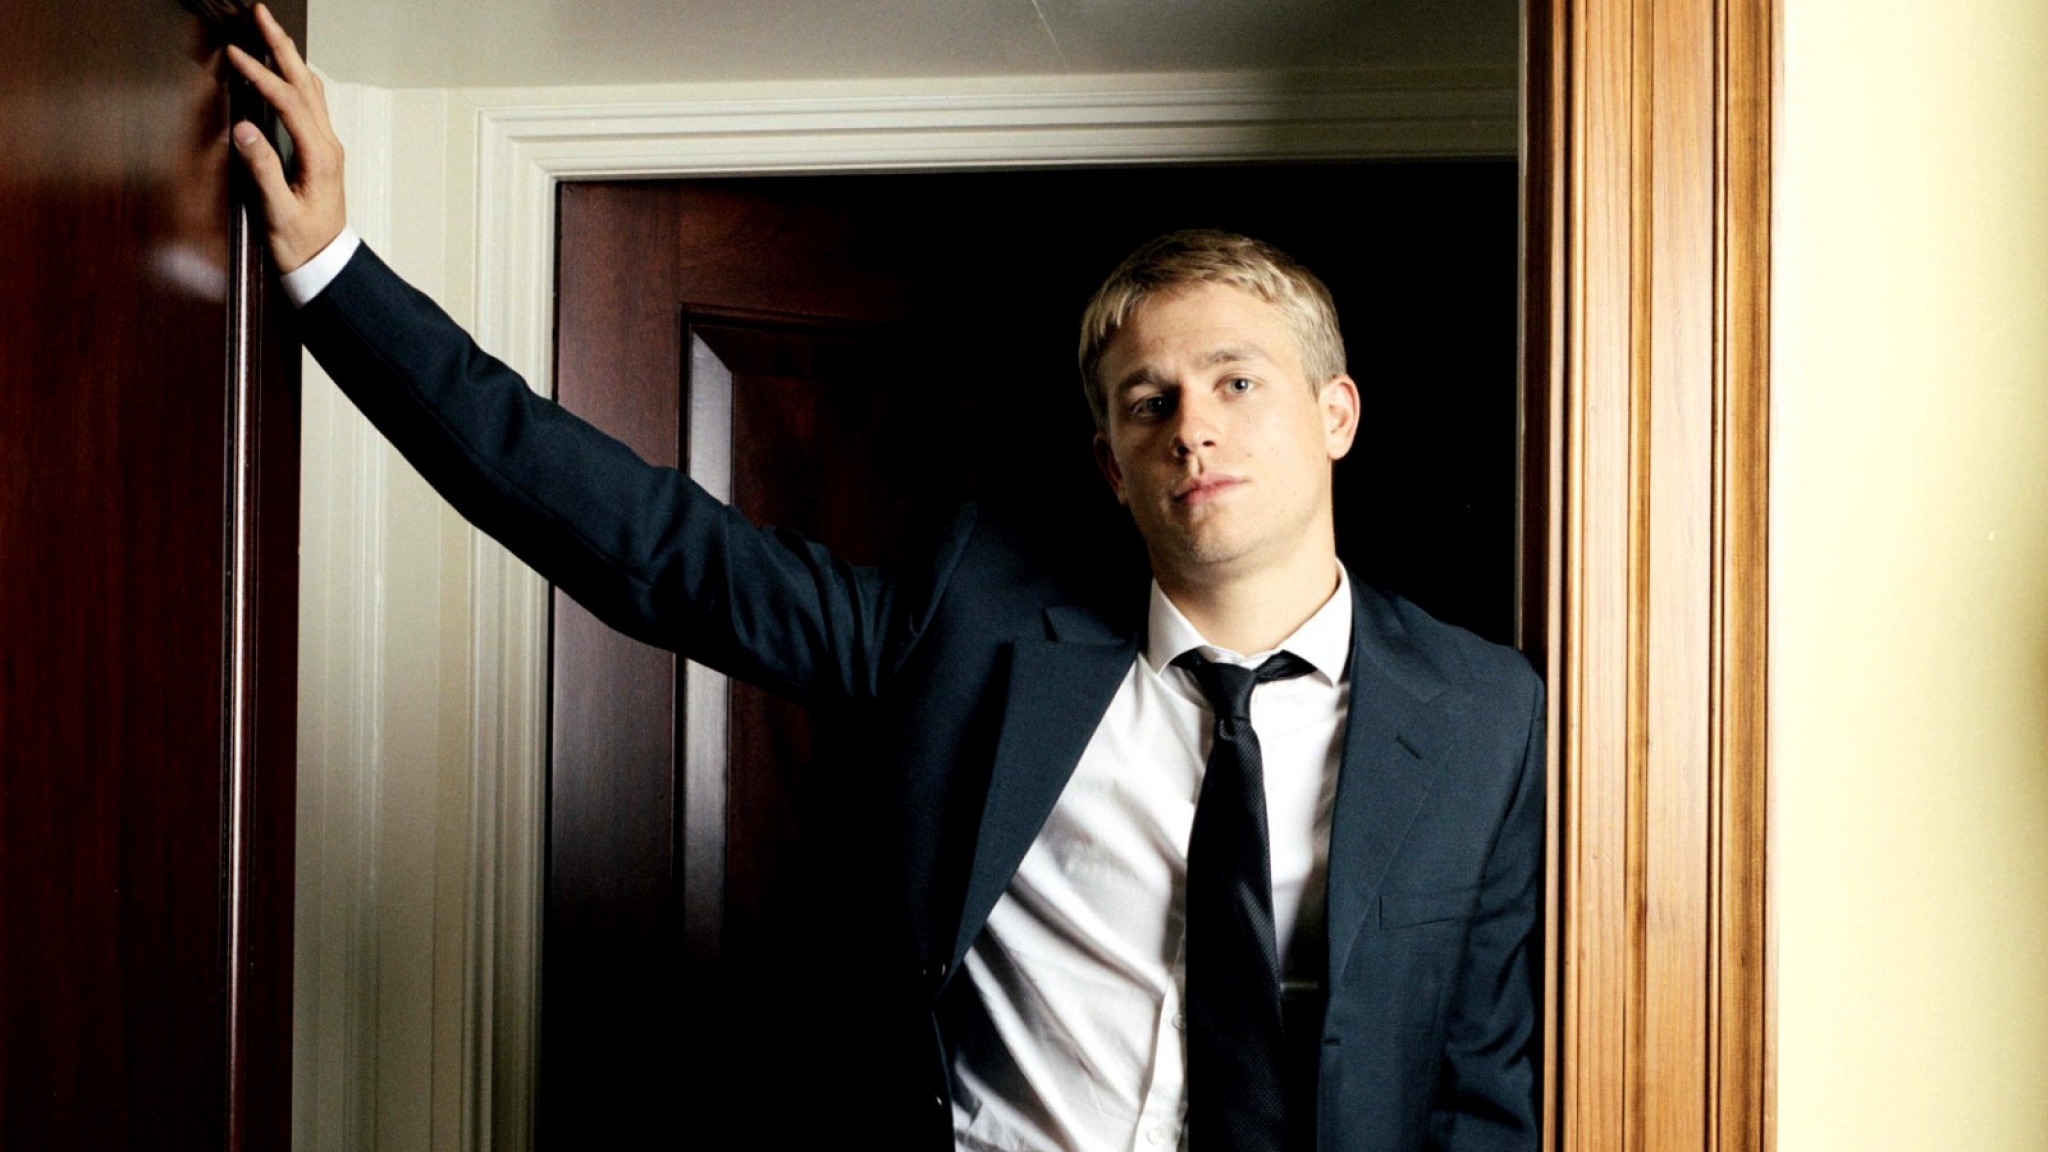 Charlie hunnam wallpapers high resolution and quality download